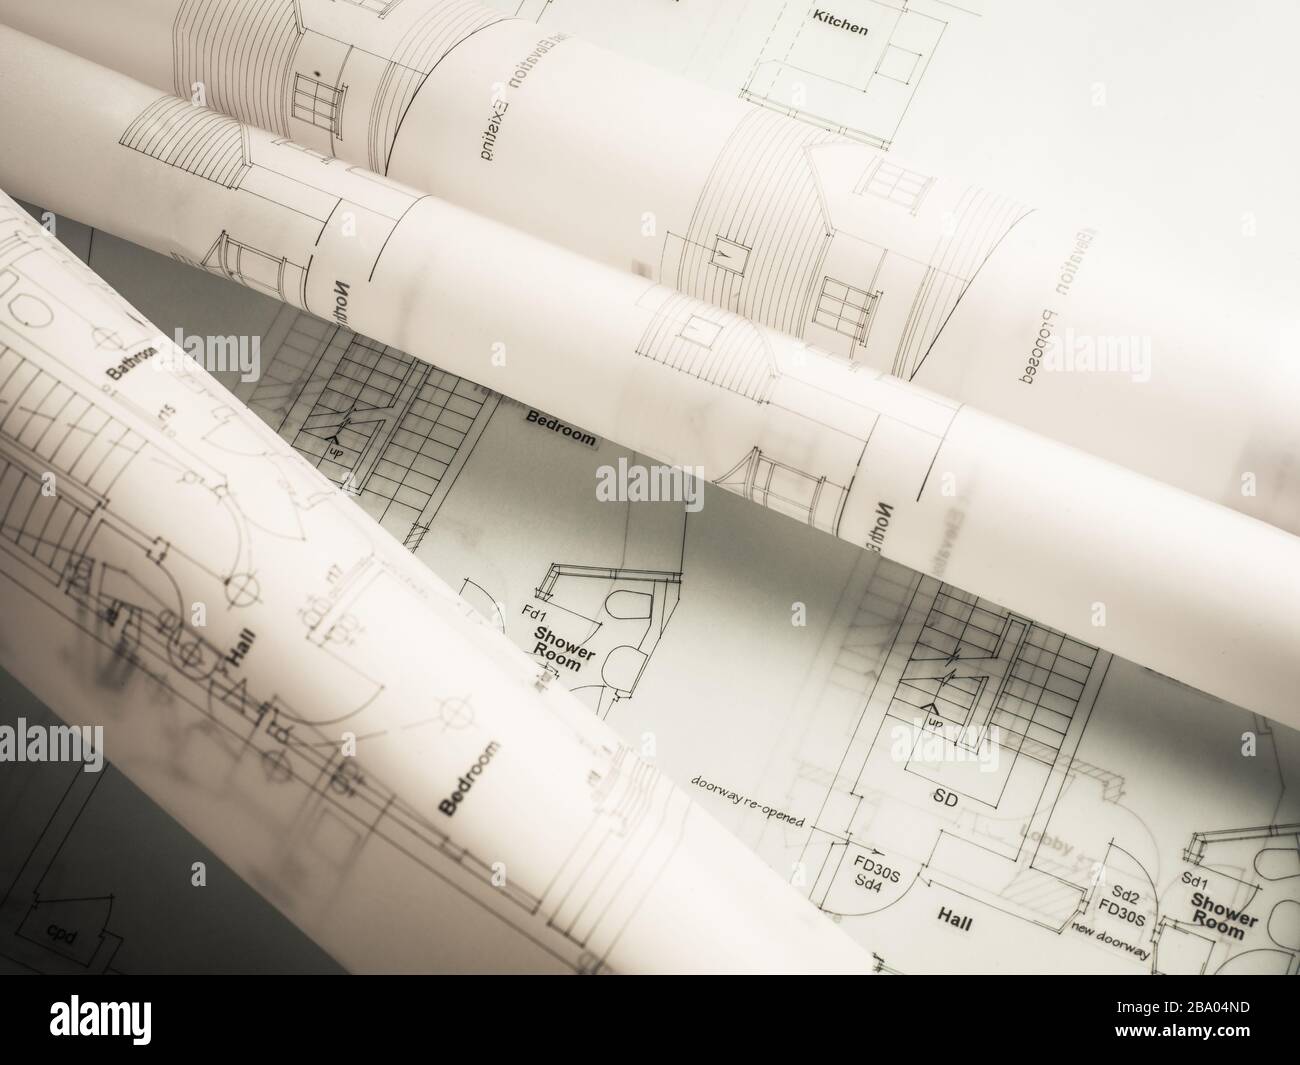 Rolls of building plans drawing designs Stock Photo